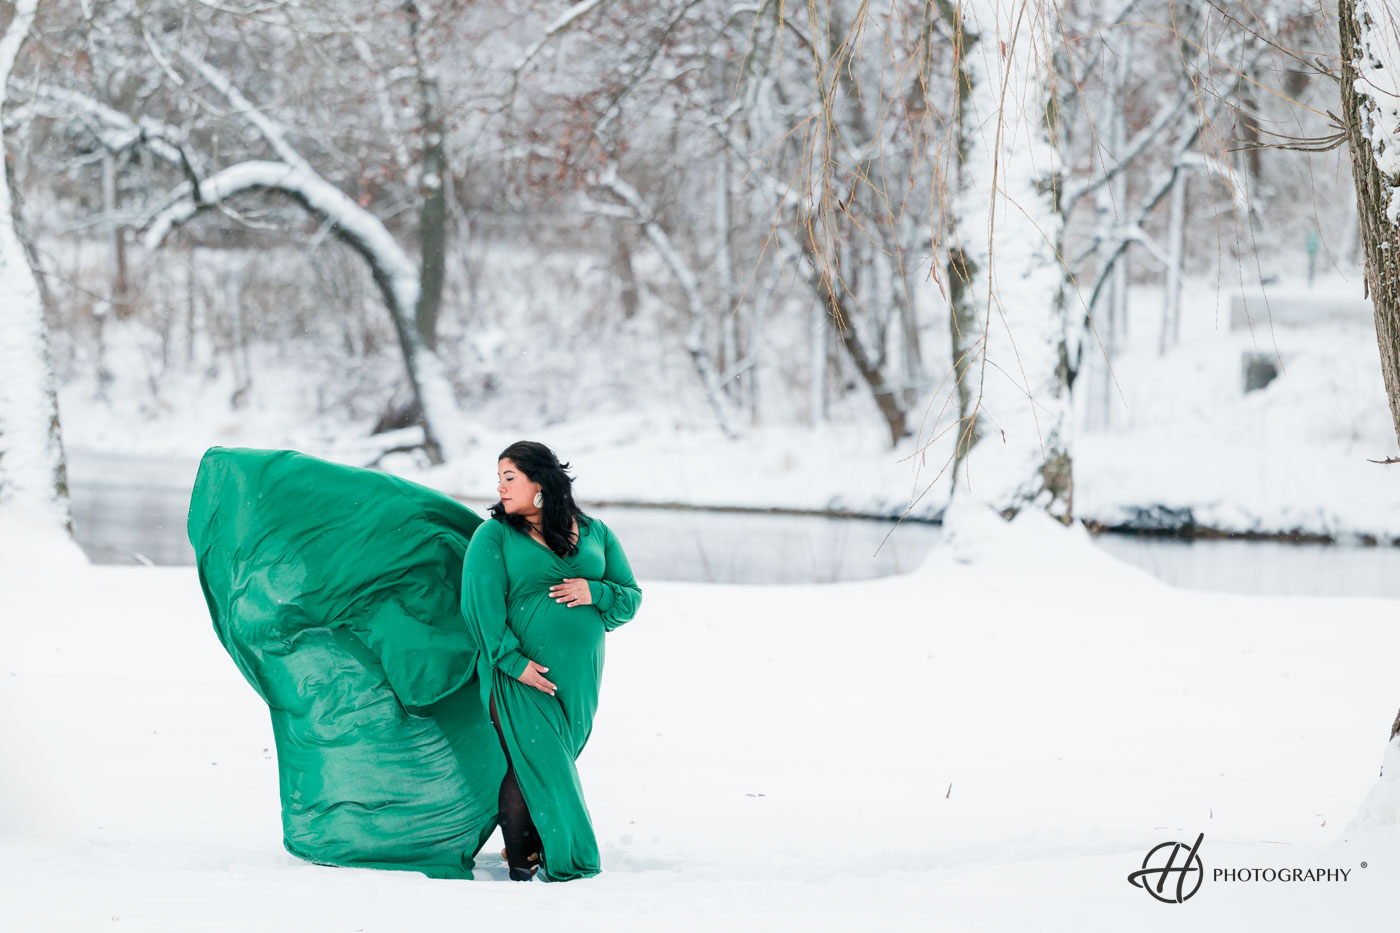 Pregnant woman in flowing green dress embraces the winter wind amidst a snowy landscape